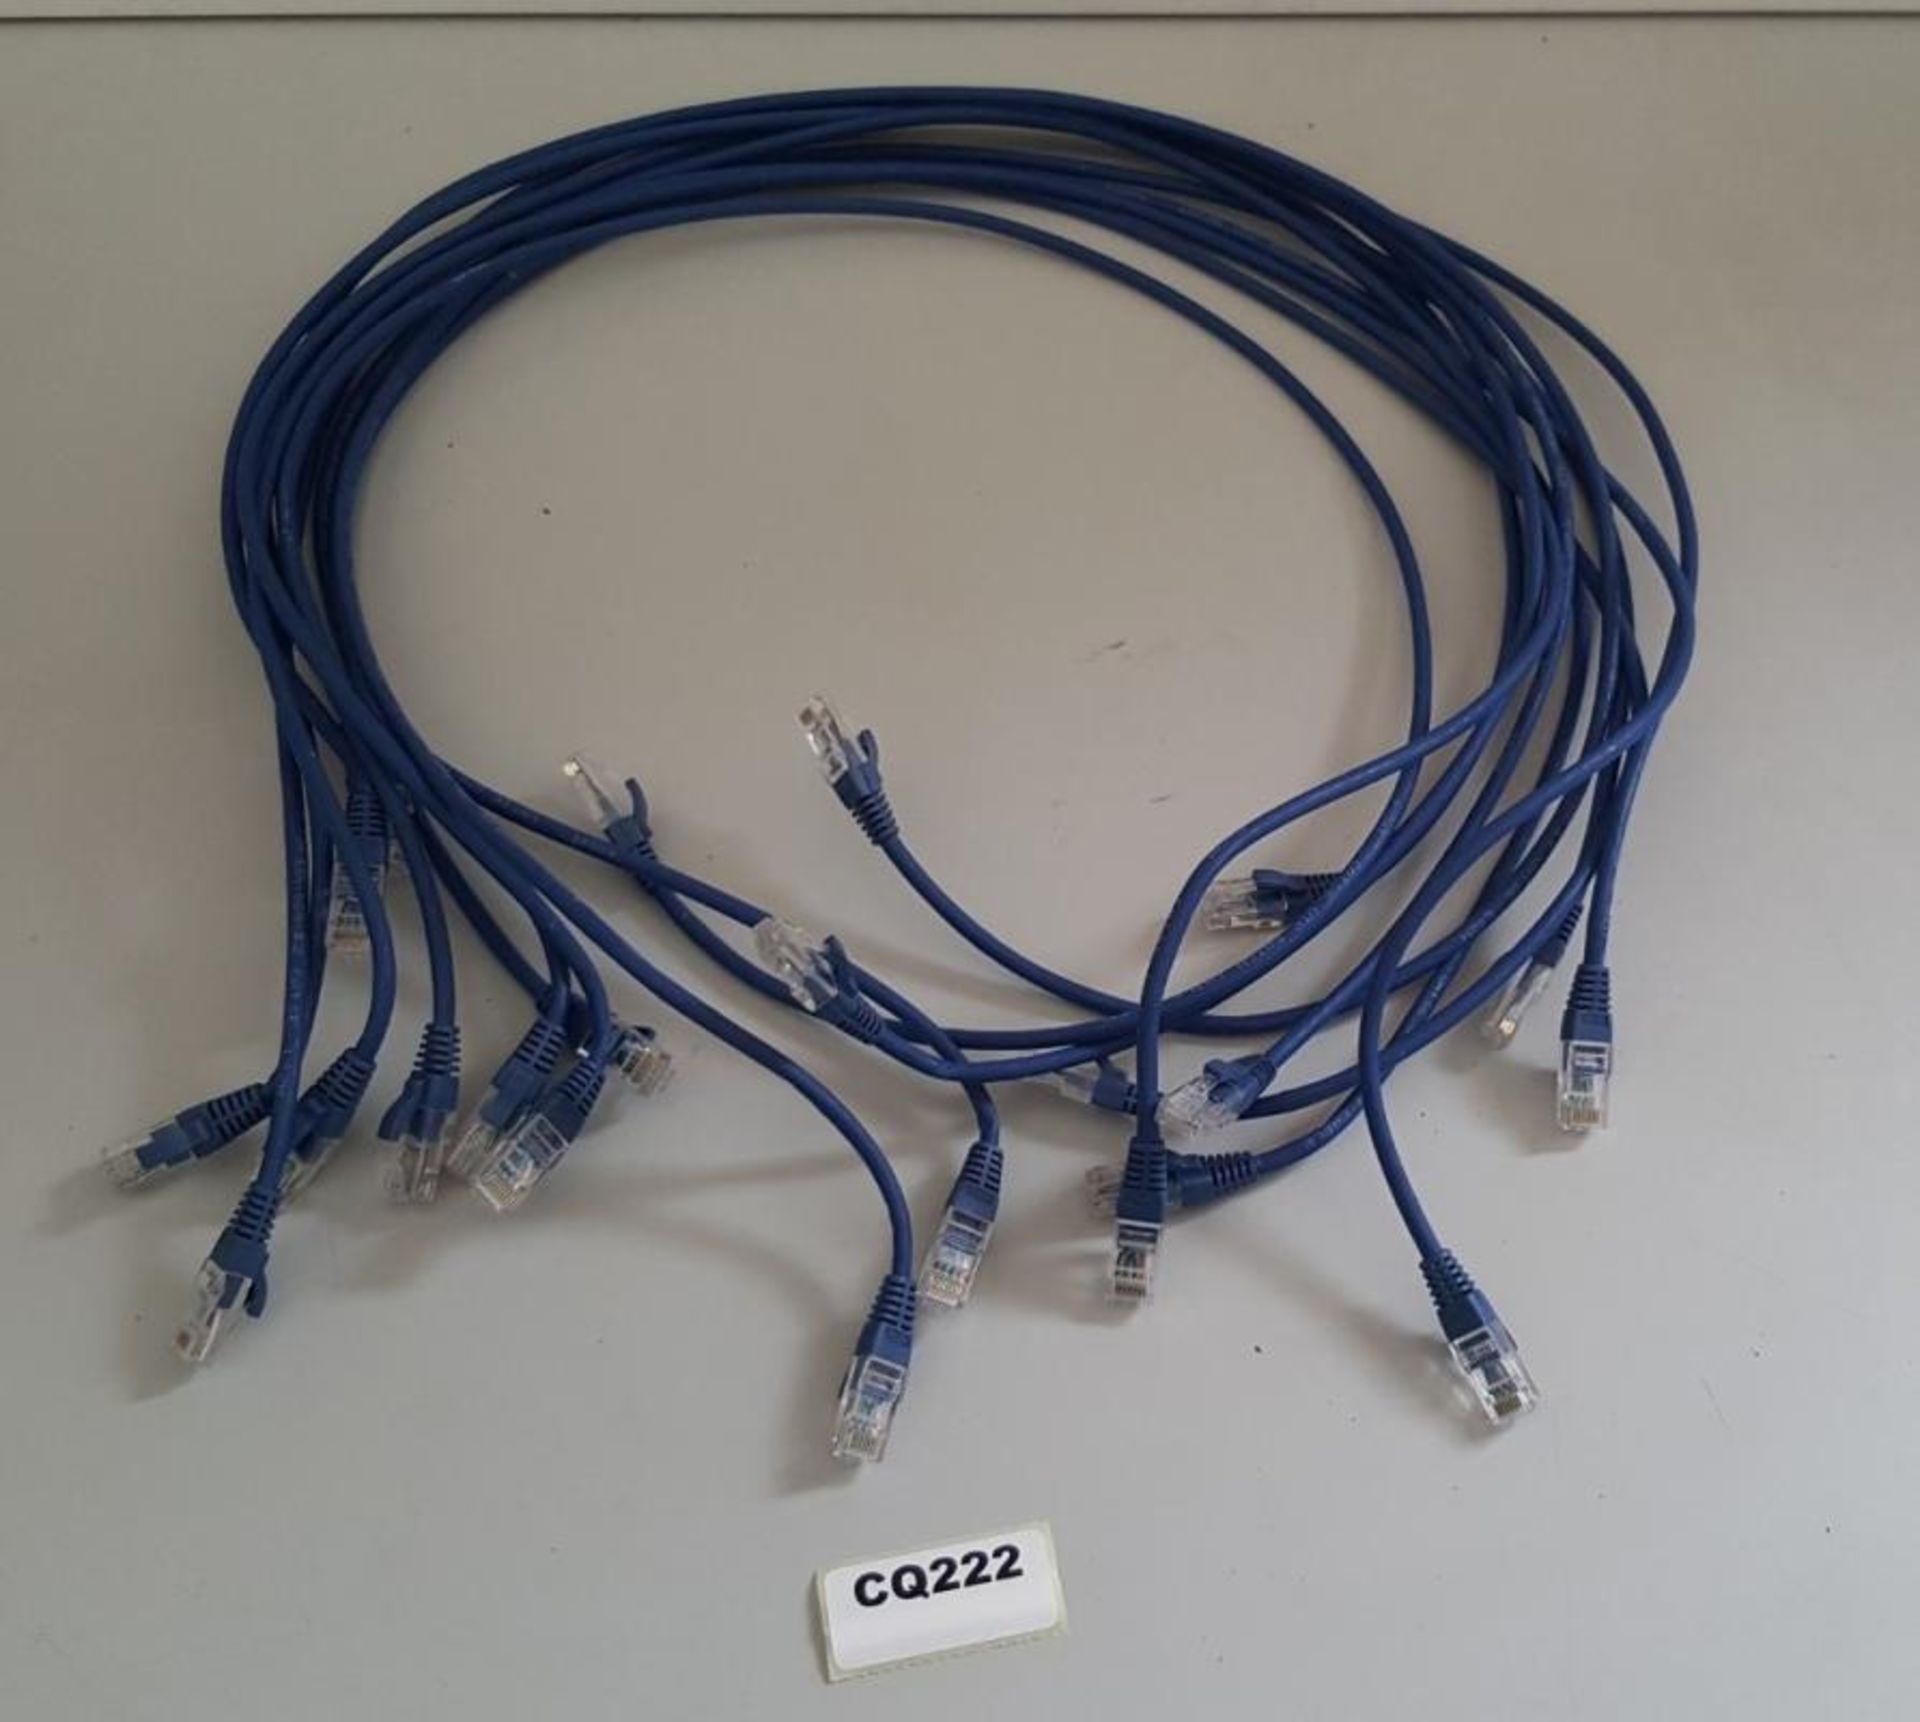 10 x 1M Ethernet Cables - Ref QC222/K2 - CL379 - Location: Altrincham WA14As per our terms a